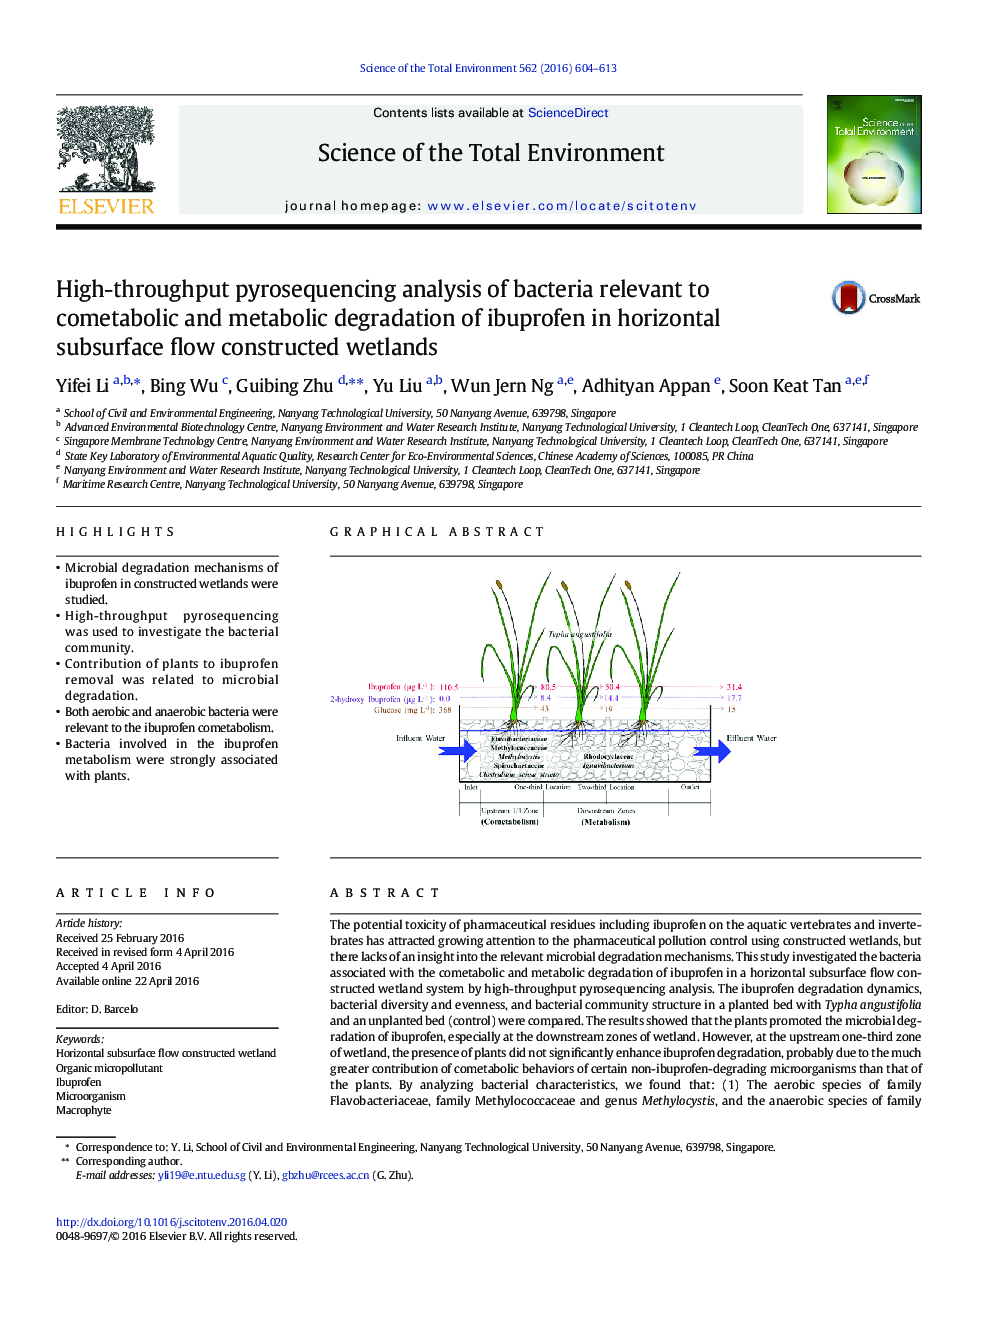 High-throughput pyrosequencing analysis of bacteria relevant to cometabolic and metabolic degradation of ibuprofen in horizontal subsurface flow constructed wetlands